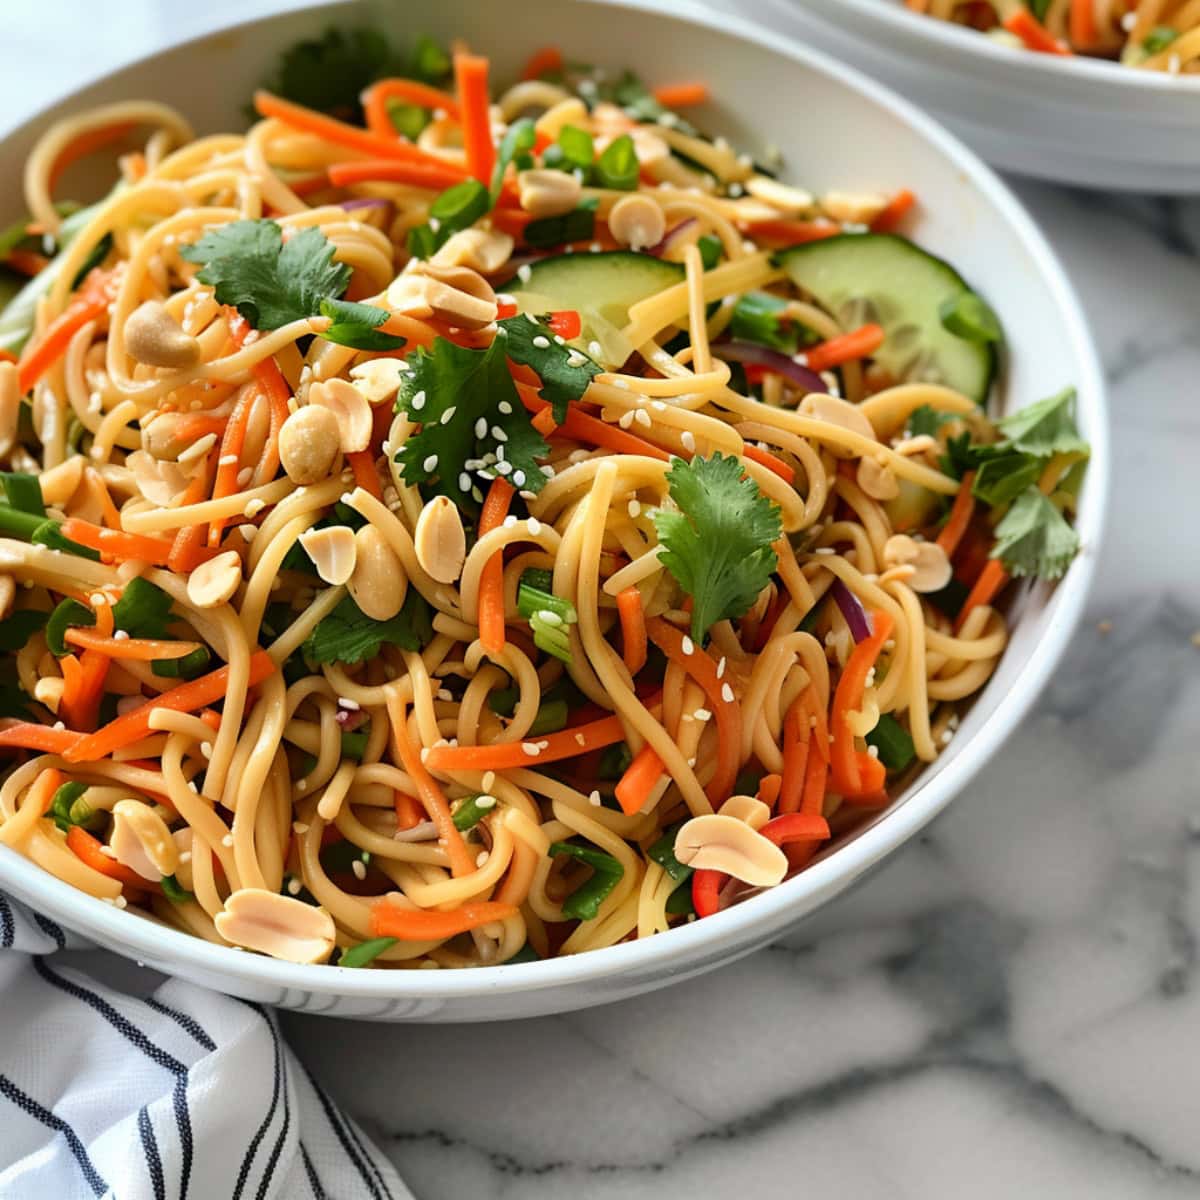 Light Asian noodle salad served with fresh herbs, crunchy vegetables, and a peanut butter dressing.